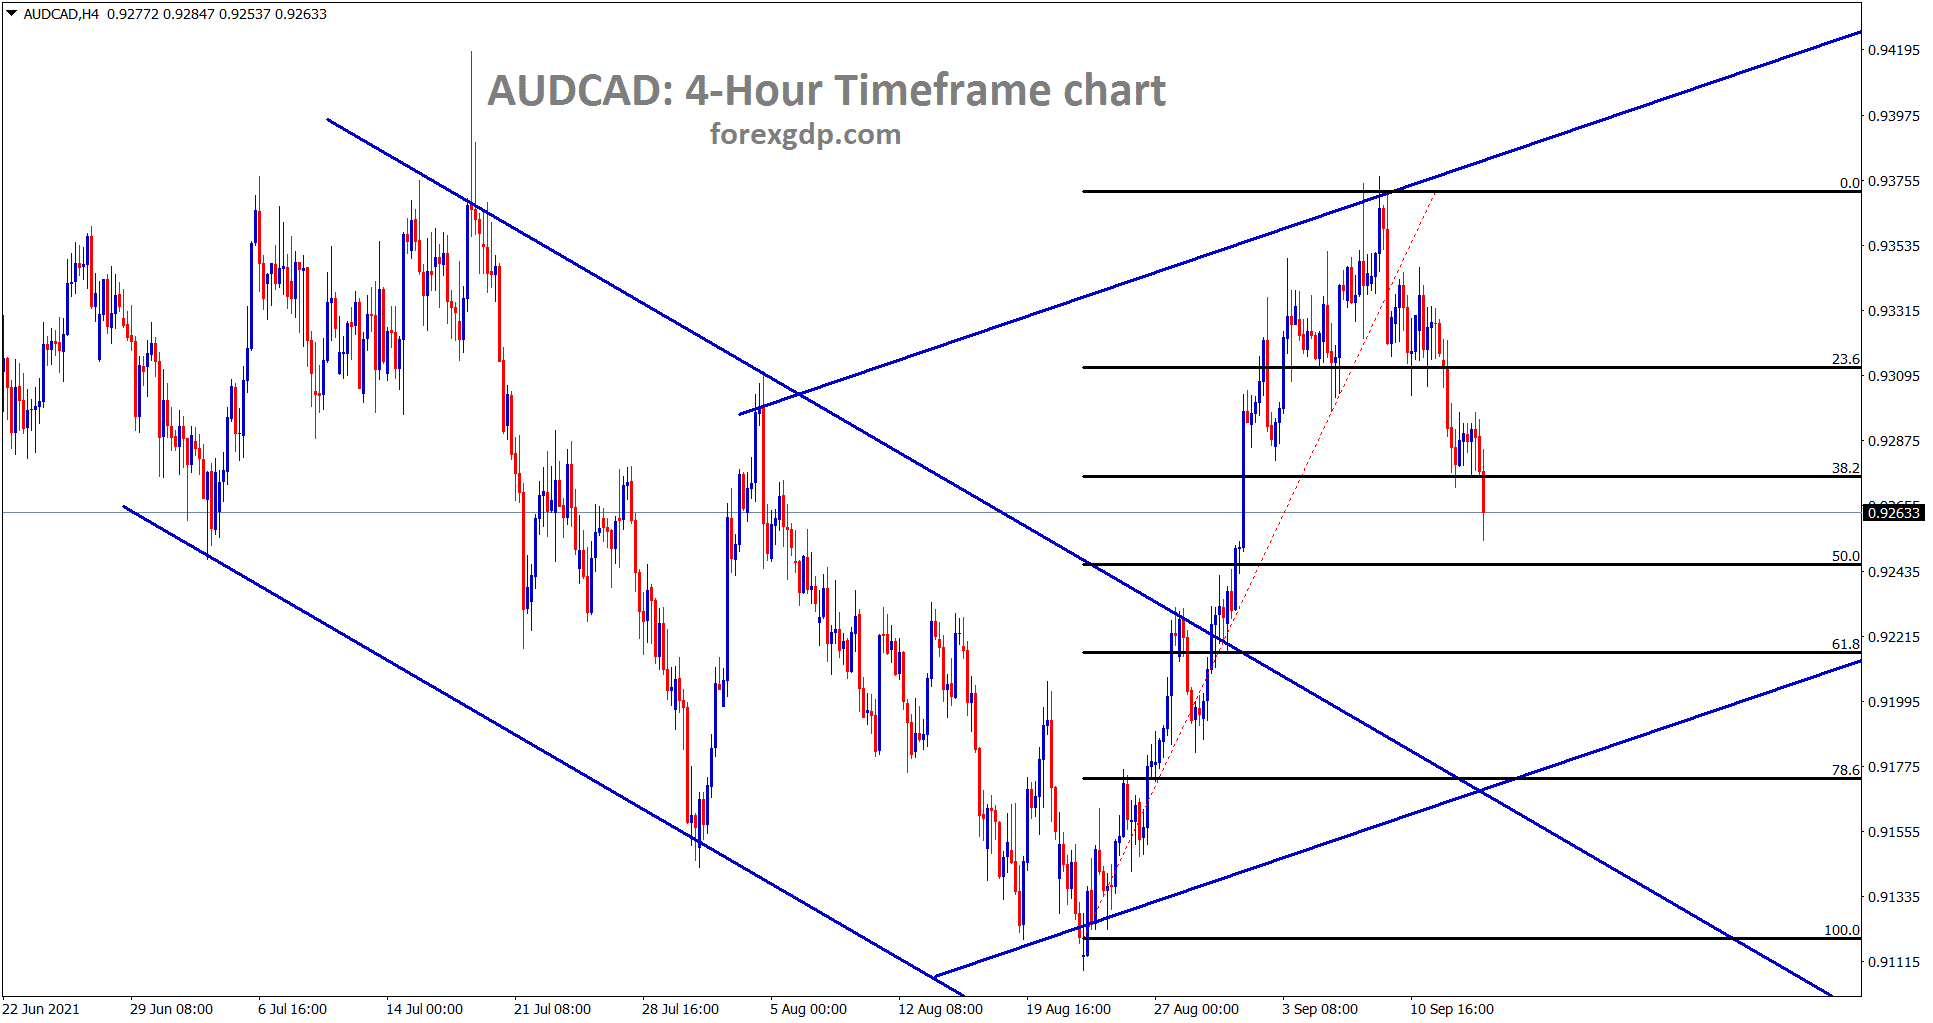 AUDCAD is making a correction from the major resistance now it has retraced nearly 40